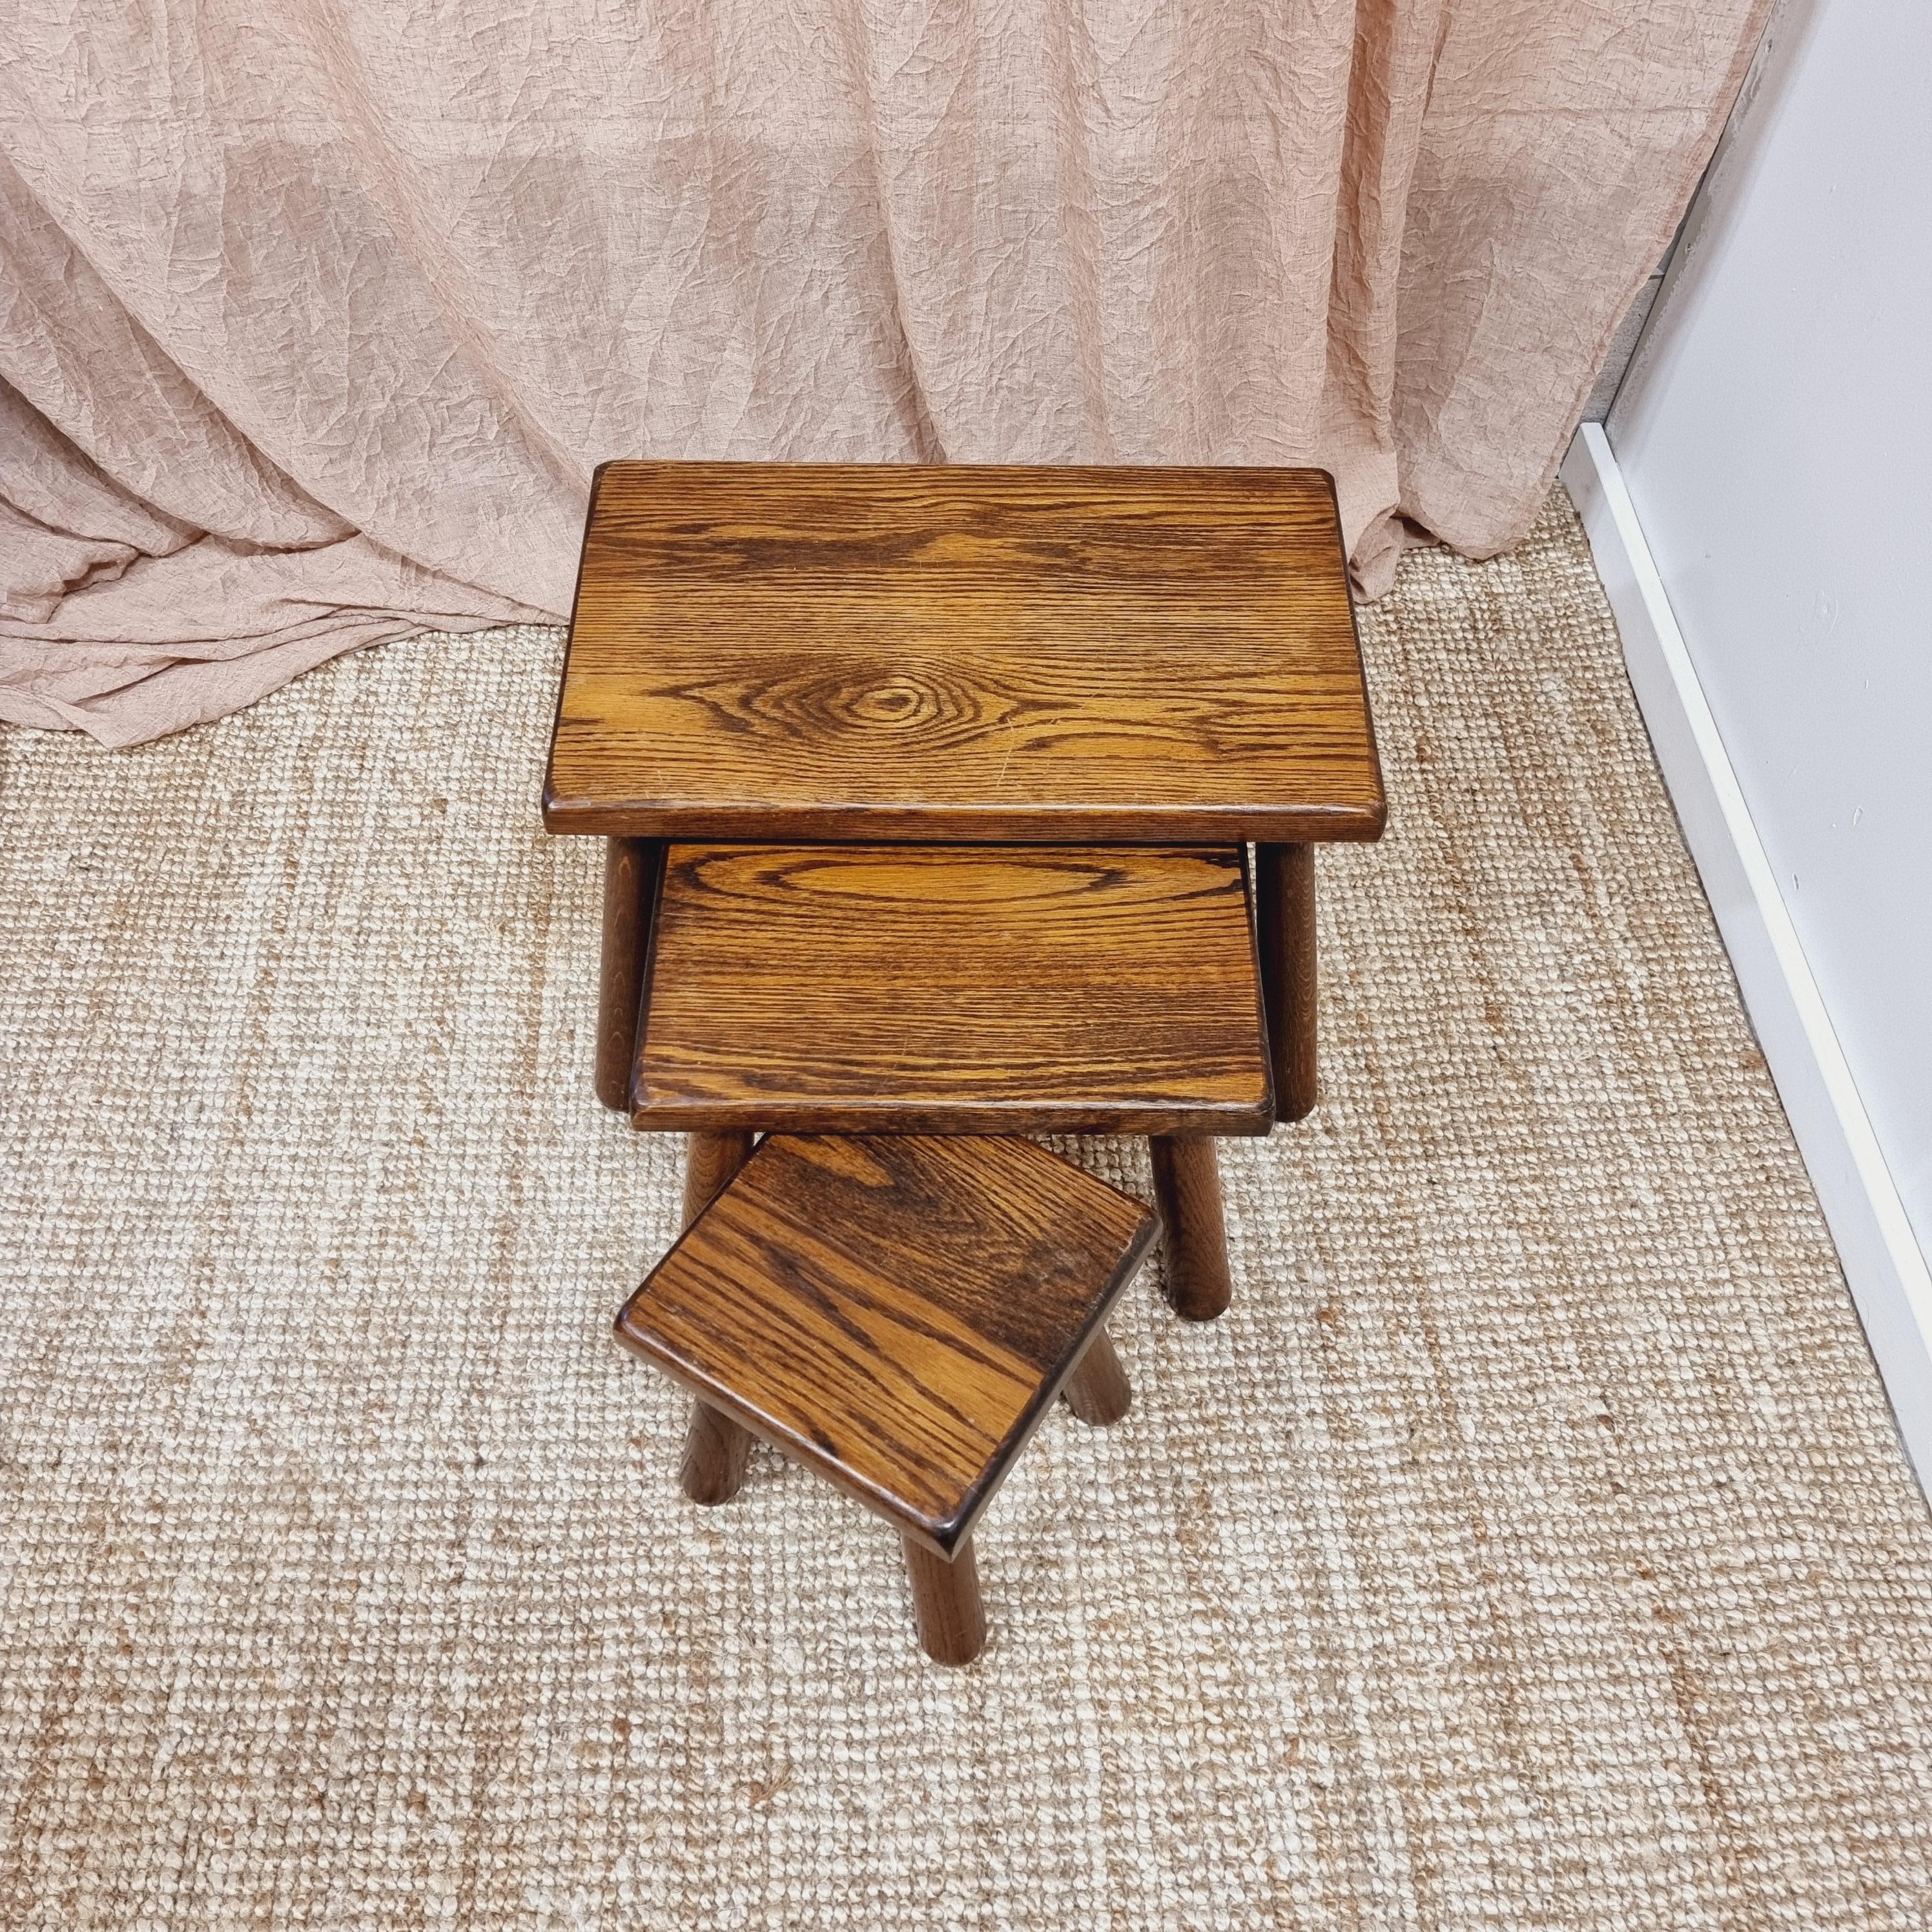 Set of Three Rustic Nesting Tables, Scandinavian / Mid-Century Modern In Good Condition For Sale In Stockholm, SE